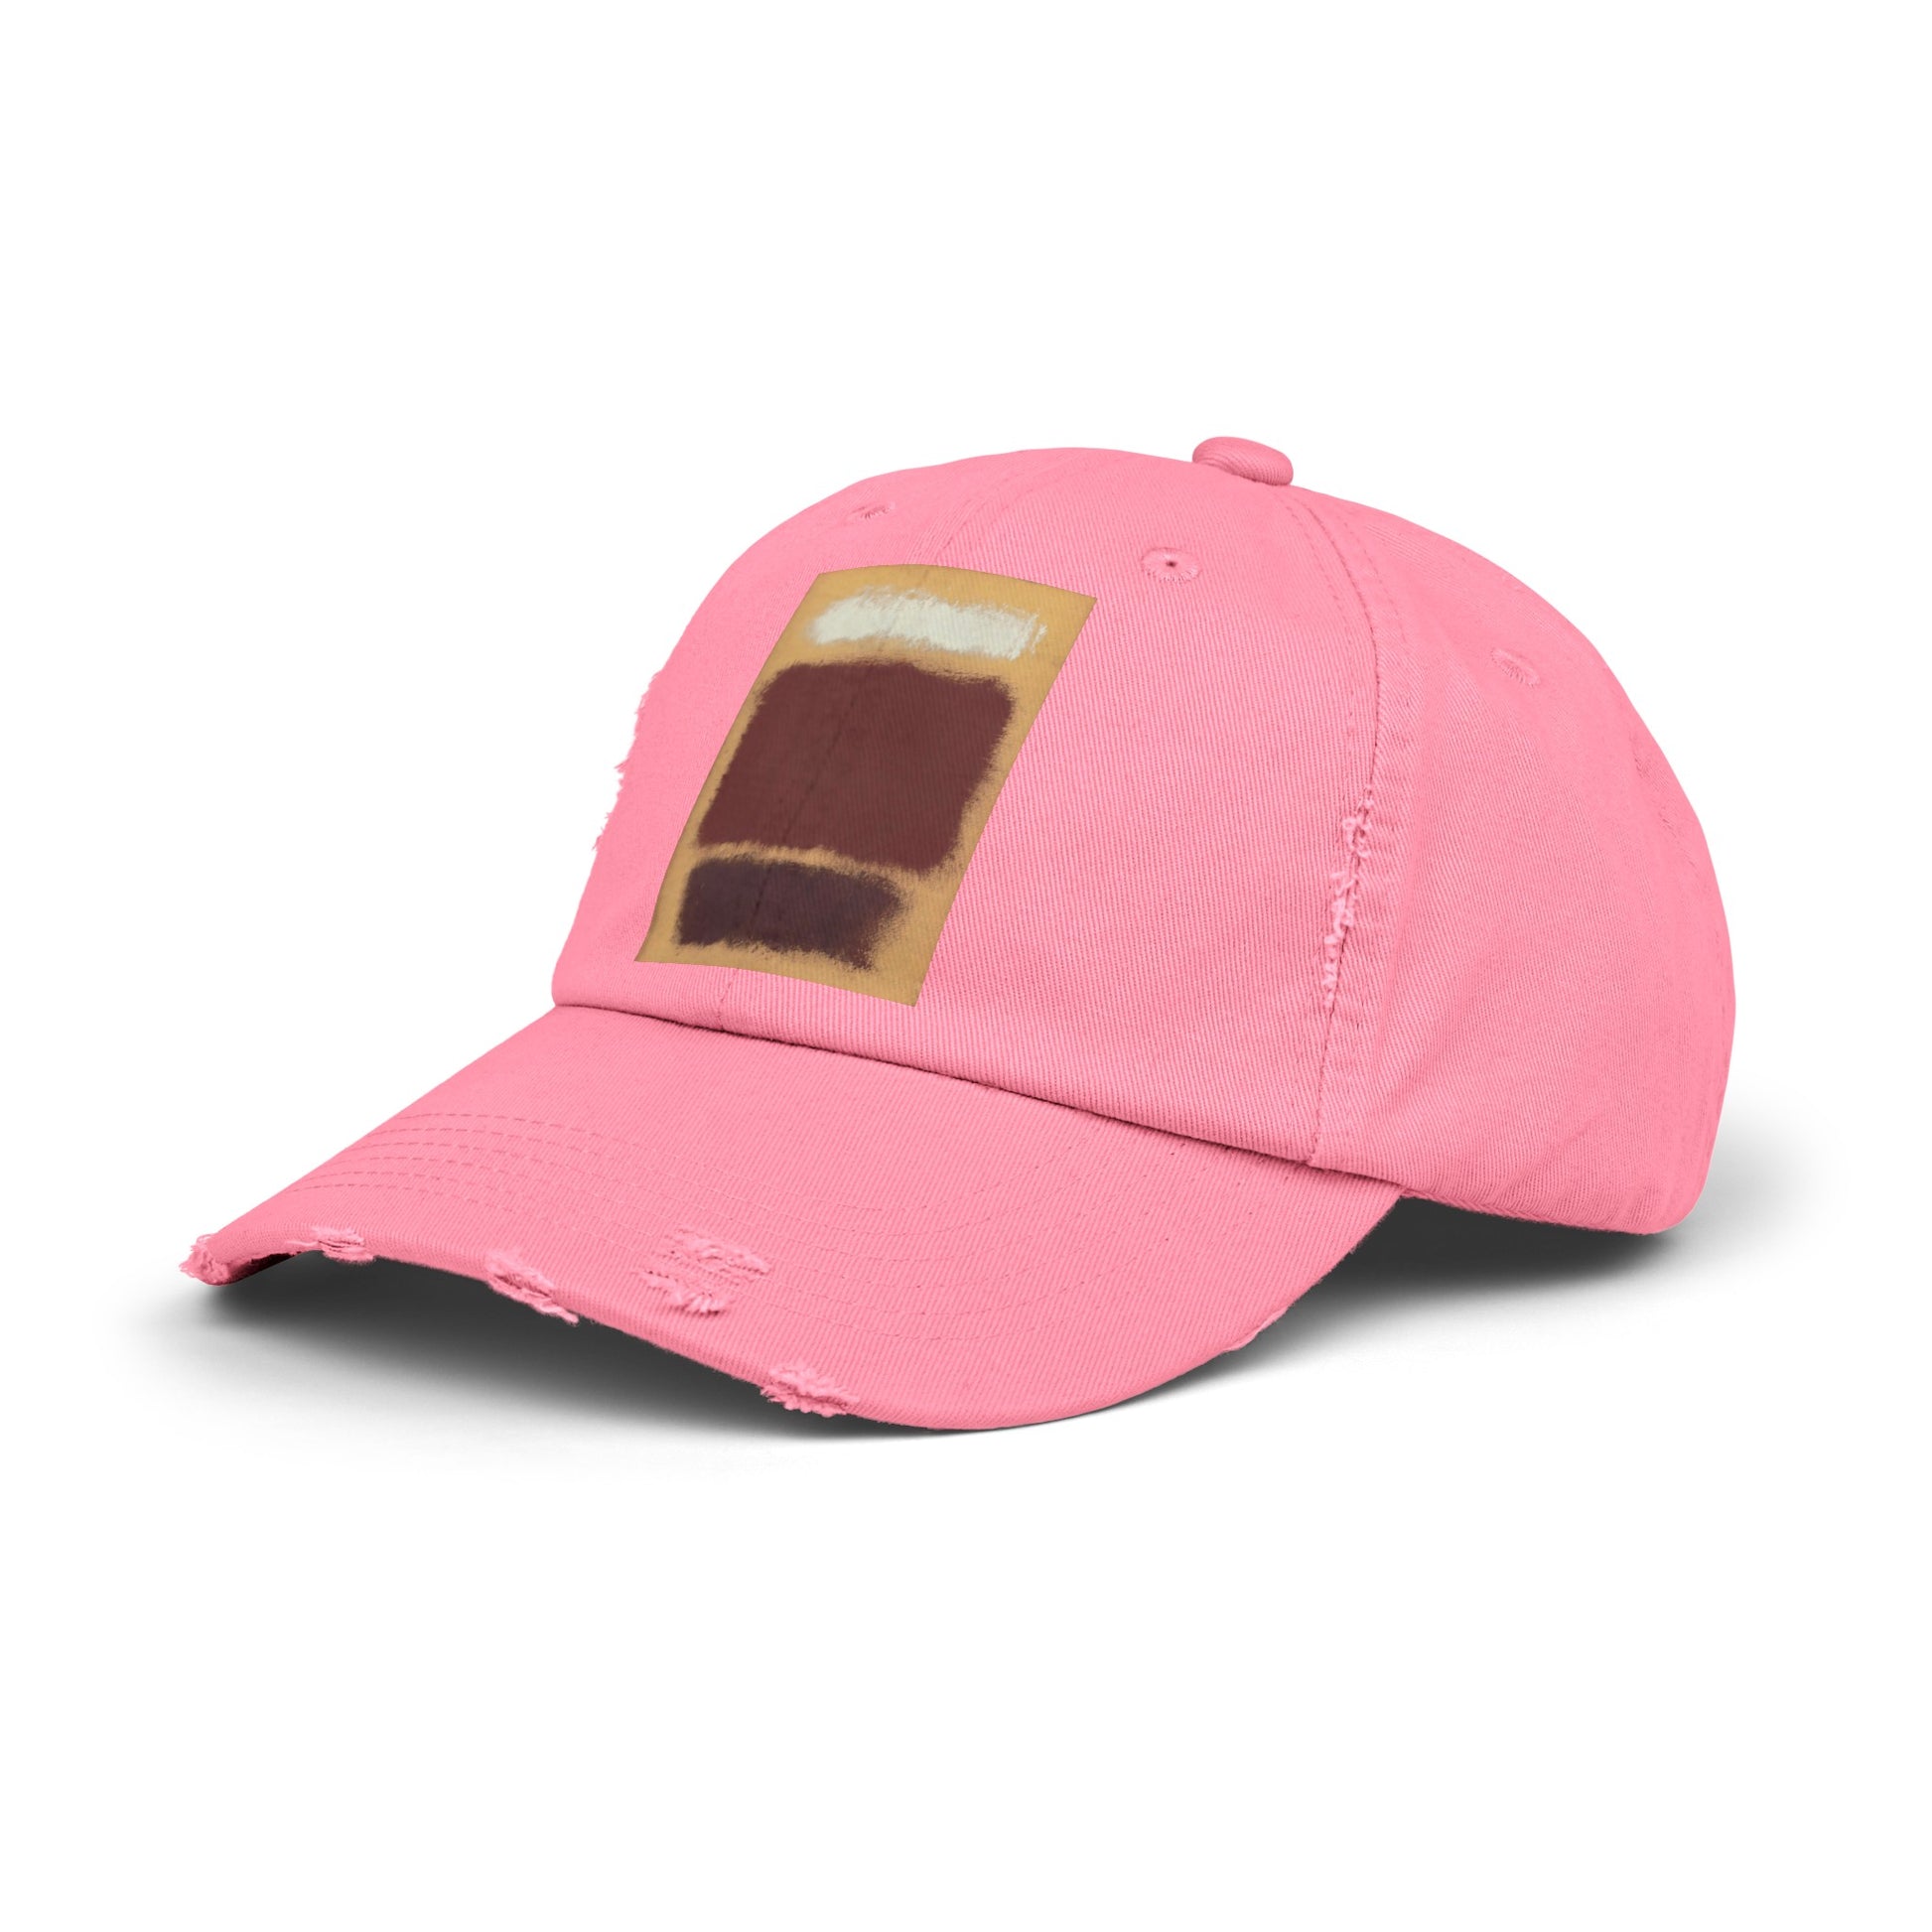 a pink hat with a piece of bread on it